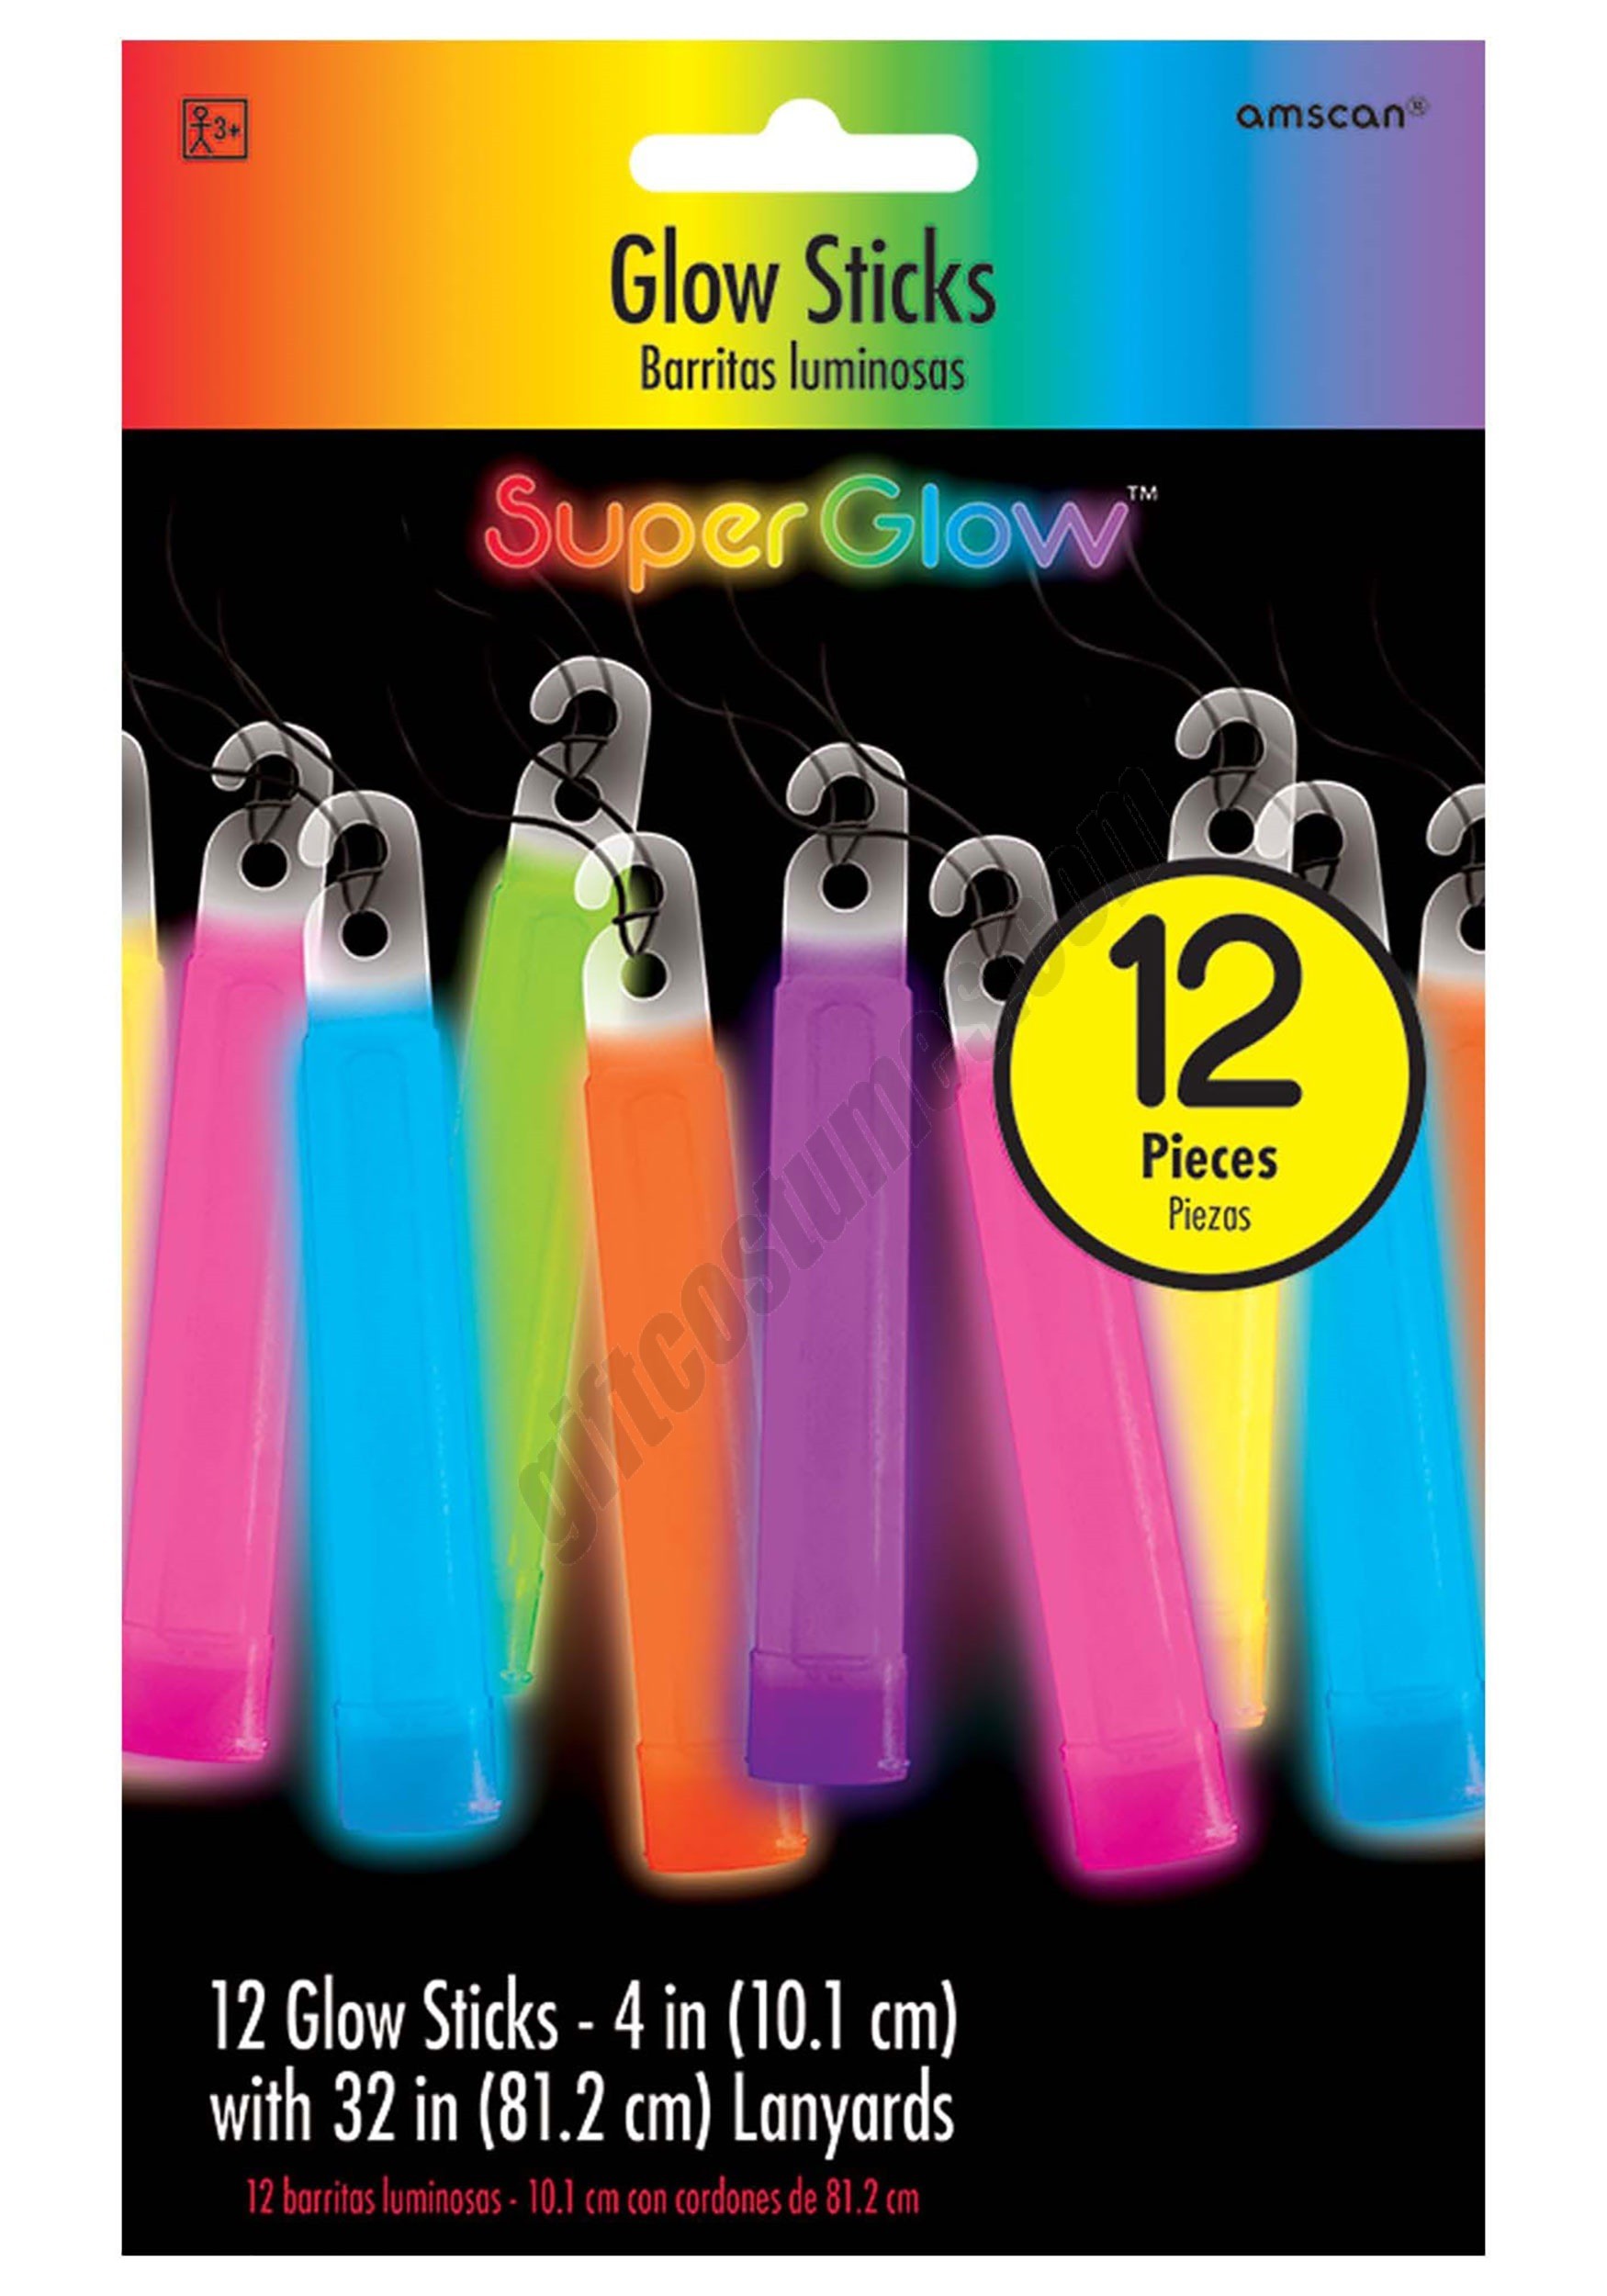 Pack of 12 Multi Color 4" Glow Sticks Promotions - Pack of 12 Multi Color 4" Glow Sticks Promotions